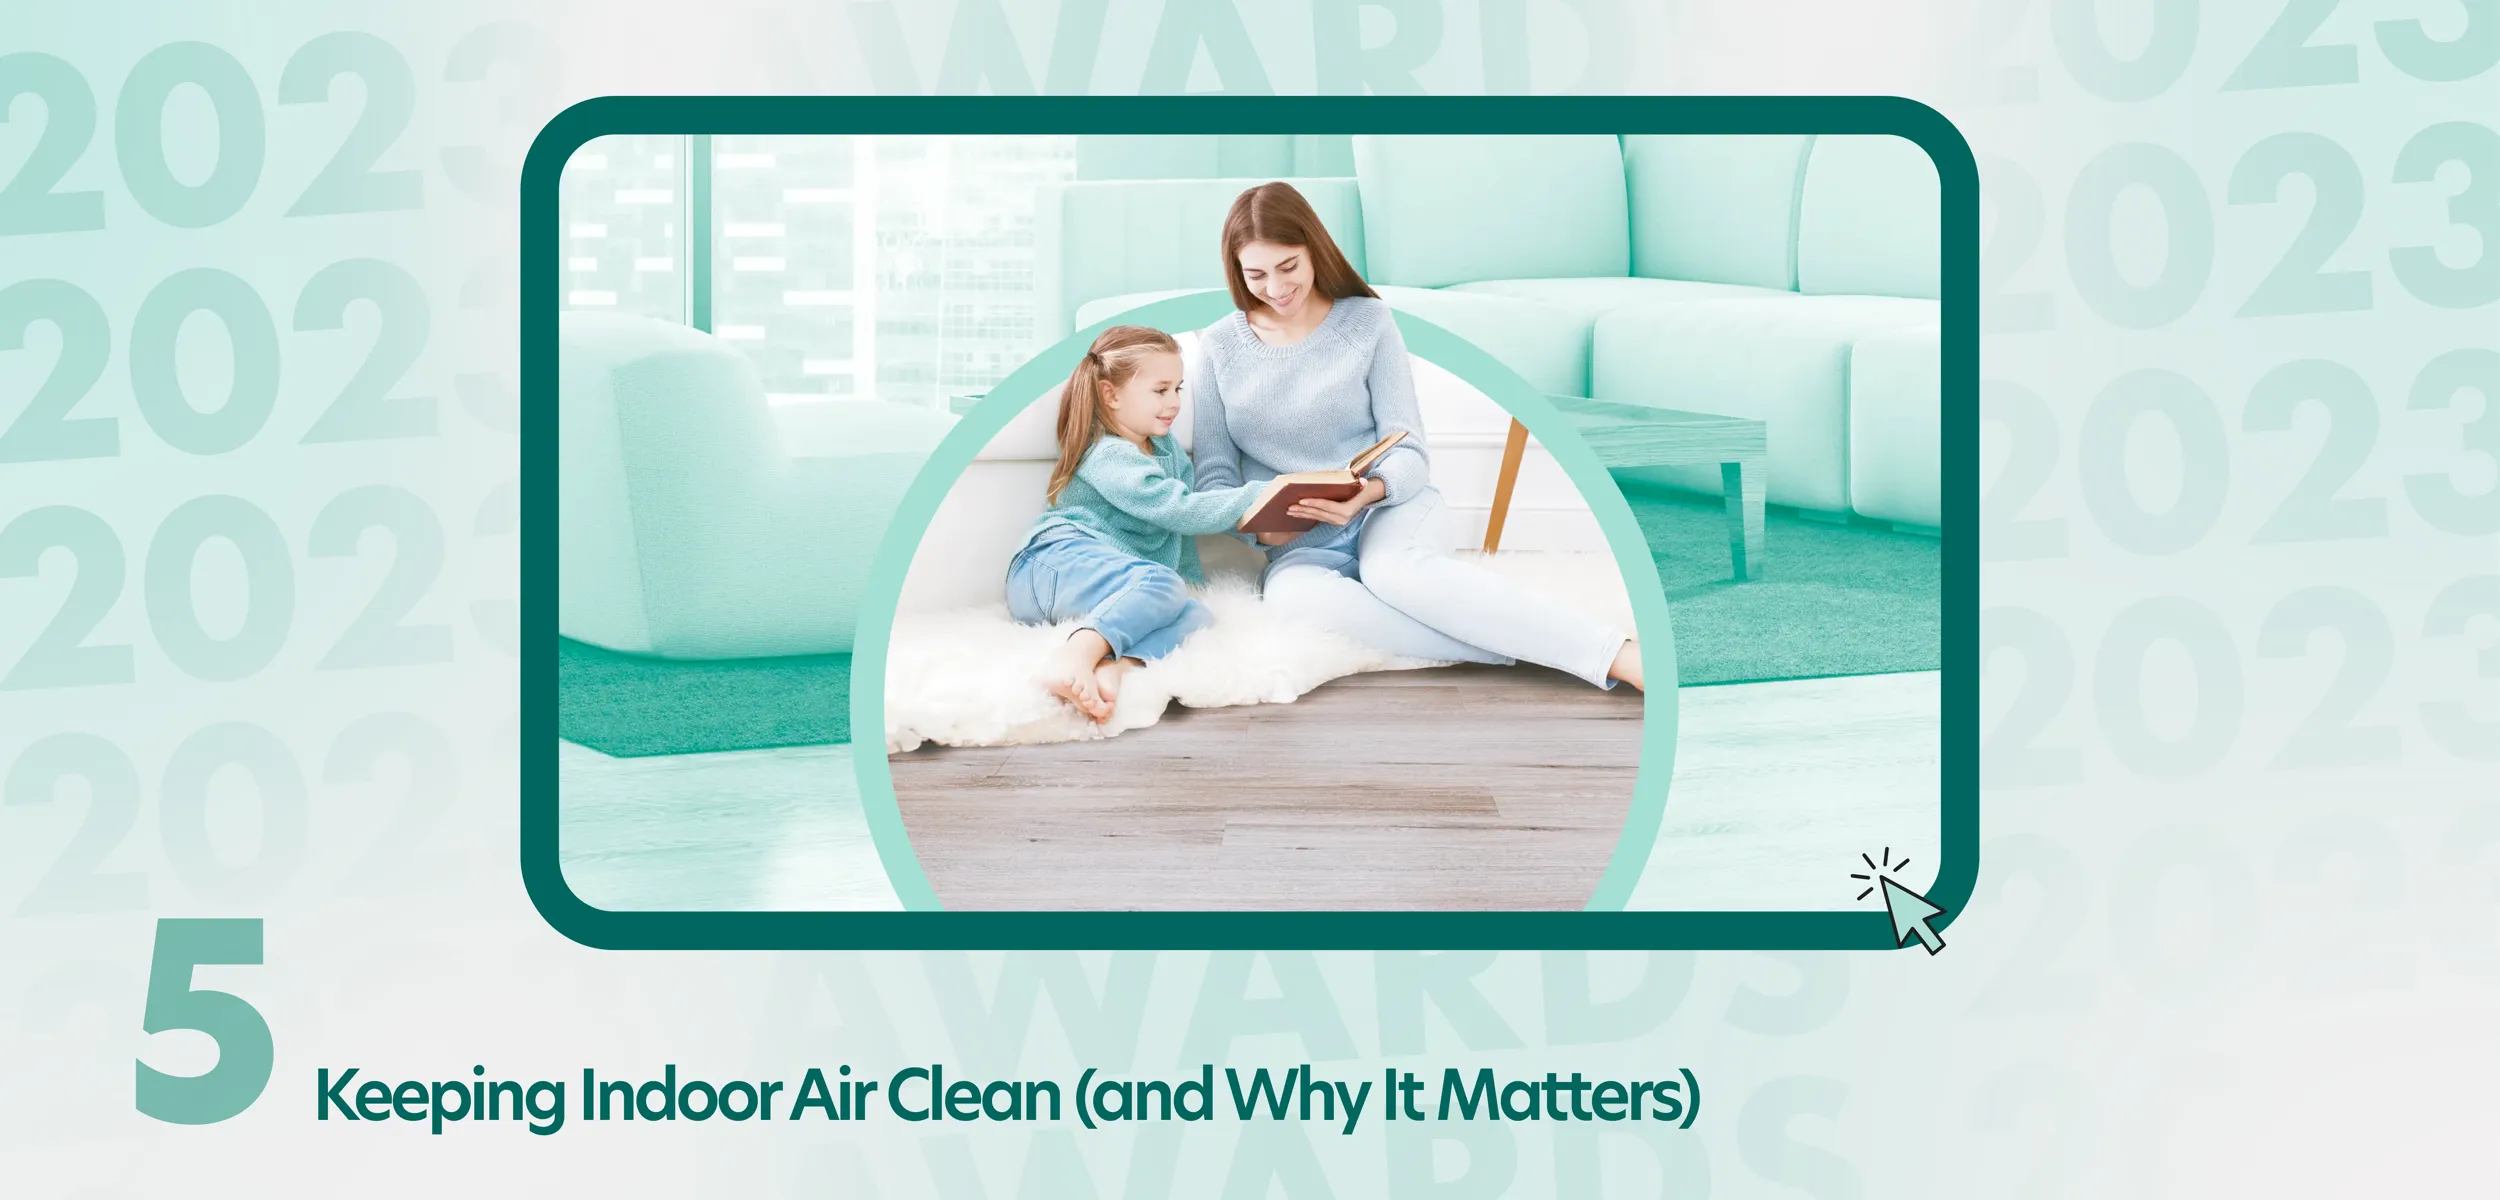 Happy mom and daughter reading a book while sitting on the floor. Title: Keeping Indoor Air Clean (and Why It Matters).